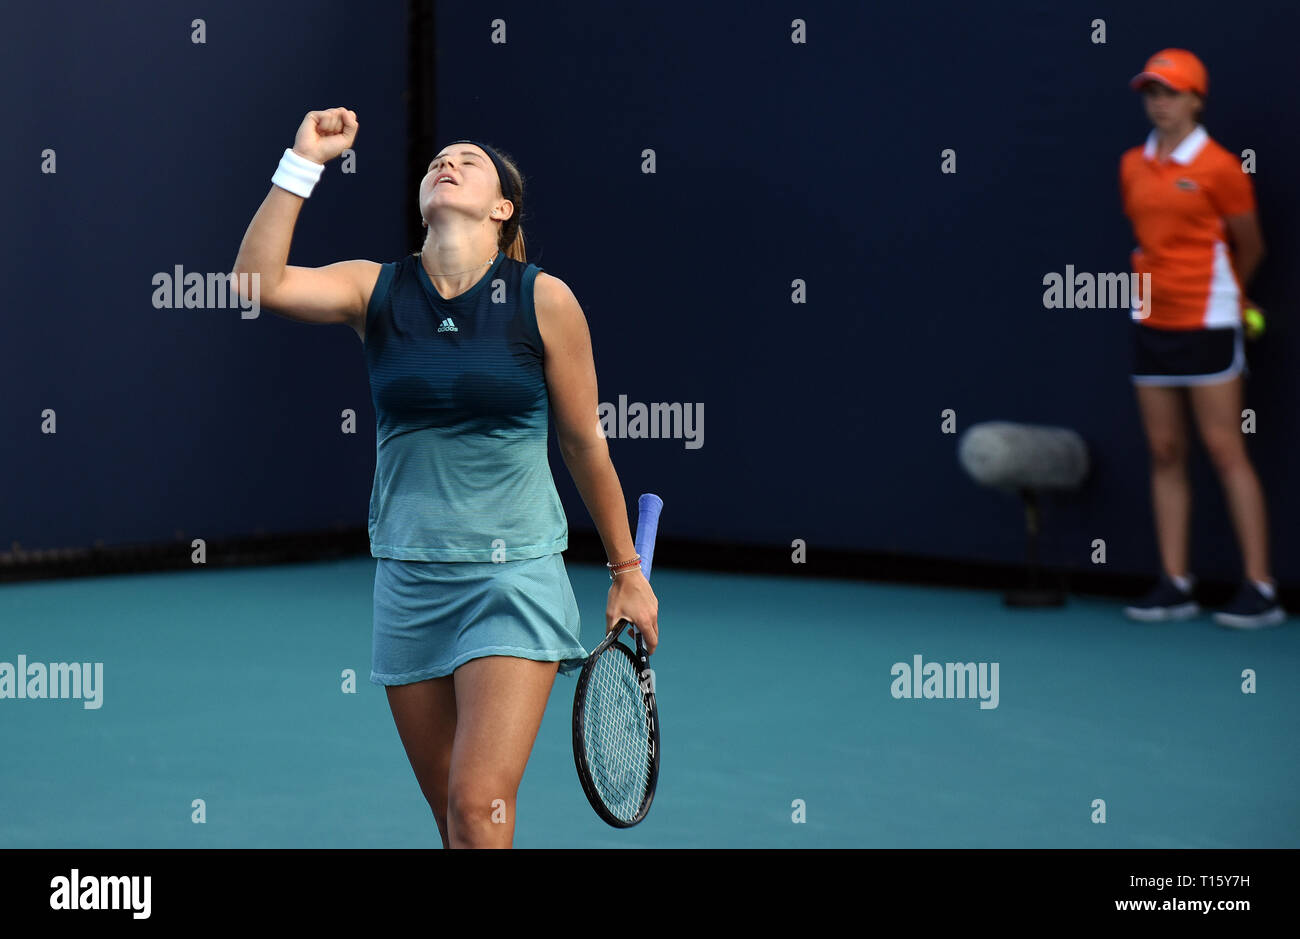 Miami, USA. 21st Mar, 2019.  Karolina Muchova of the Czech Republic reacts after winning a match against Nao Hibino of Japan at the Hard Rock Stadium at the Miami Open on March 21, 2019 in Miami Gardens, Florida. Muchova beat Hibino 6-3, 6-3.(Paul Hennessy/Alamy) Credit: Paul Hennessy/Alamy Live News Stock Photo